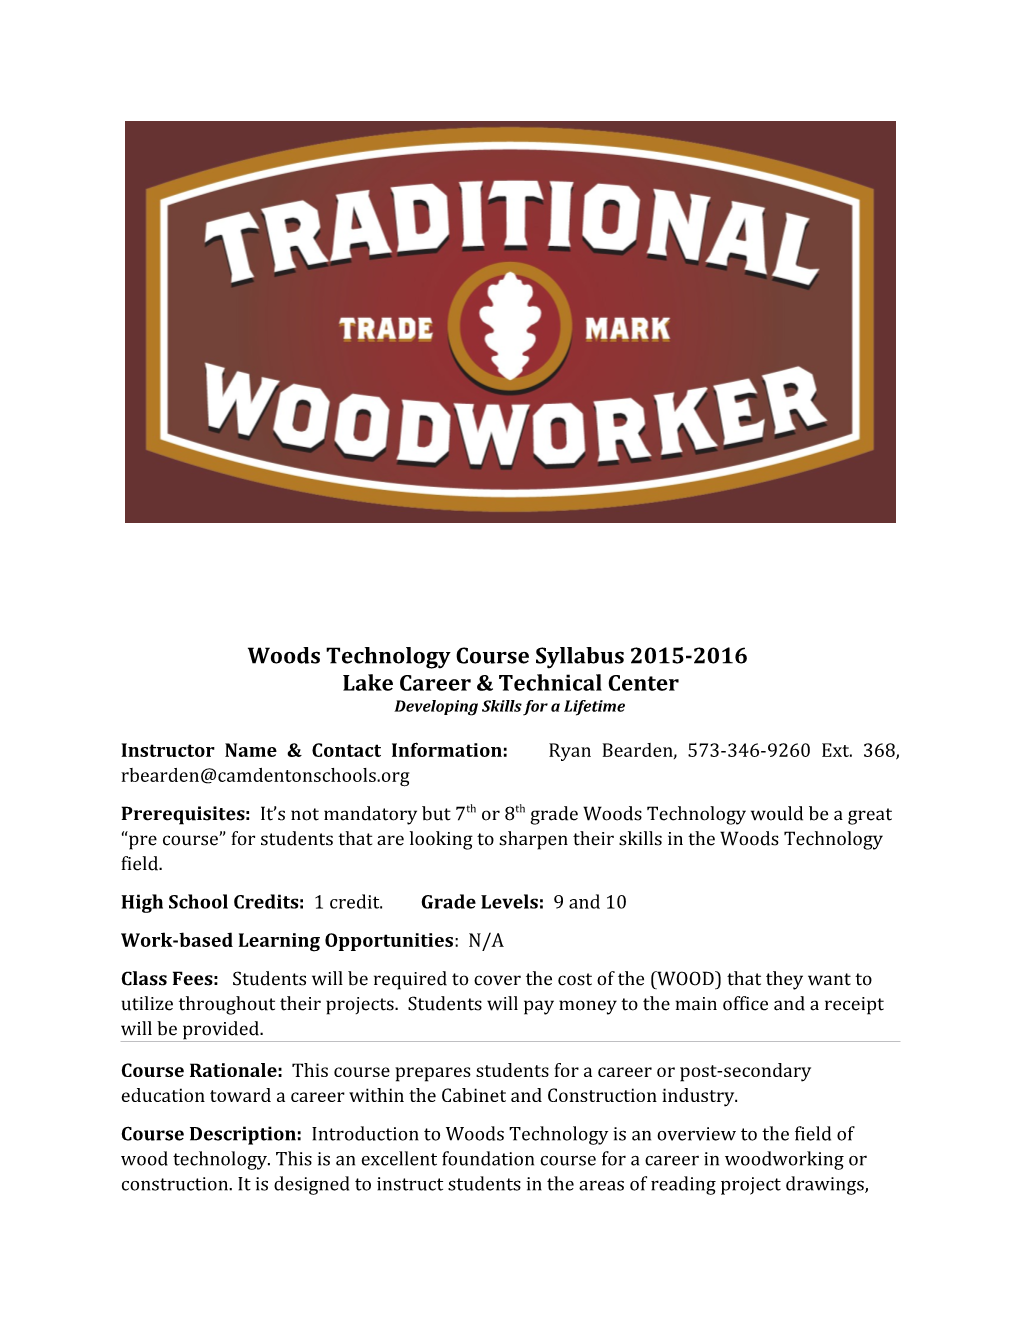 Woods Technology Course Syllabus 2015-2016